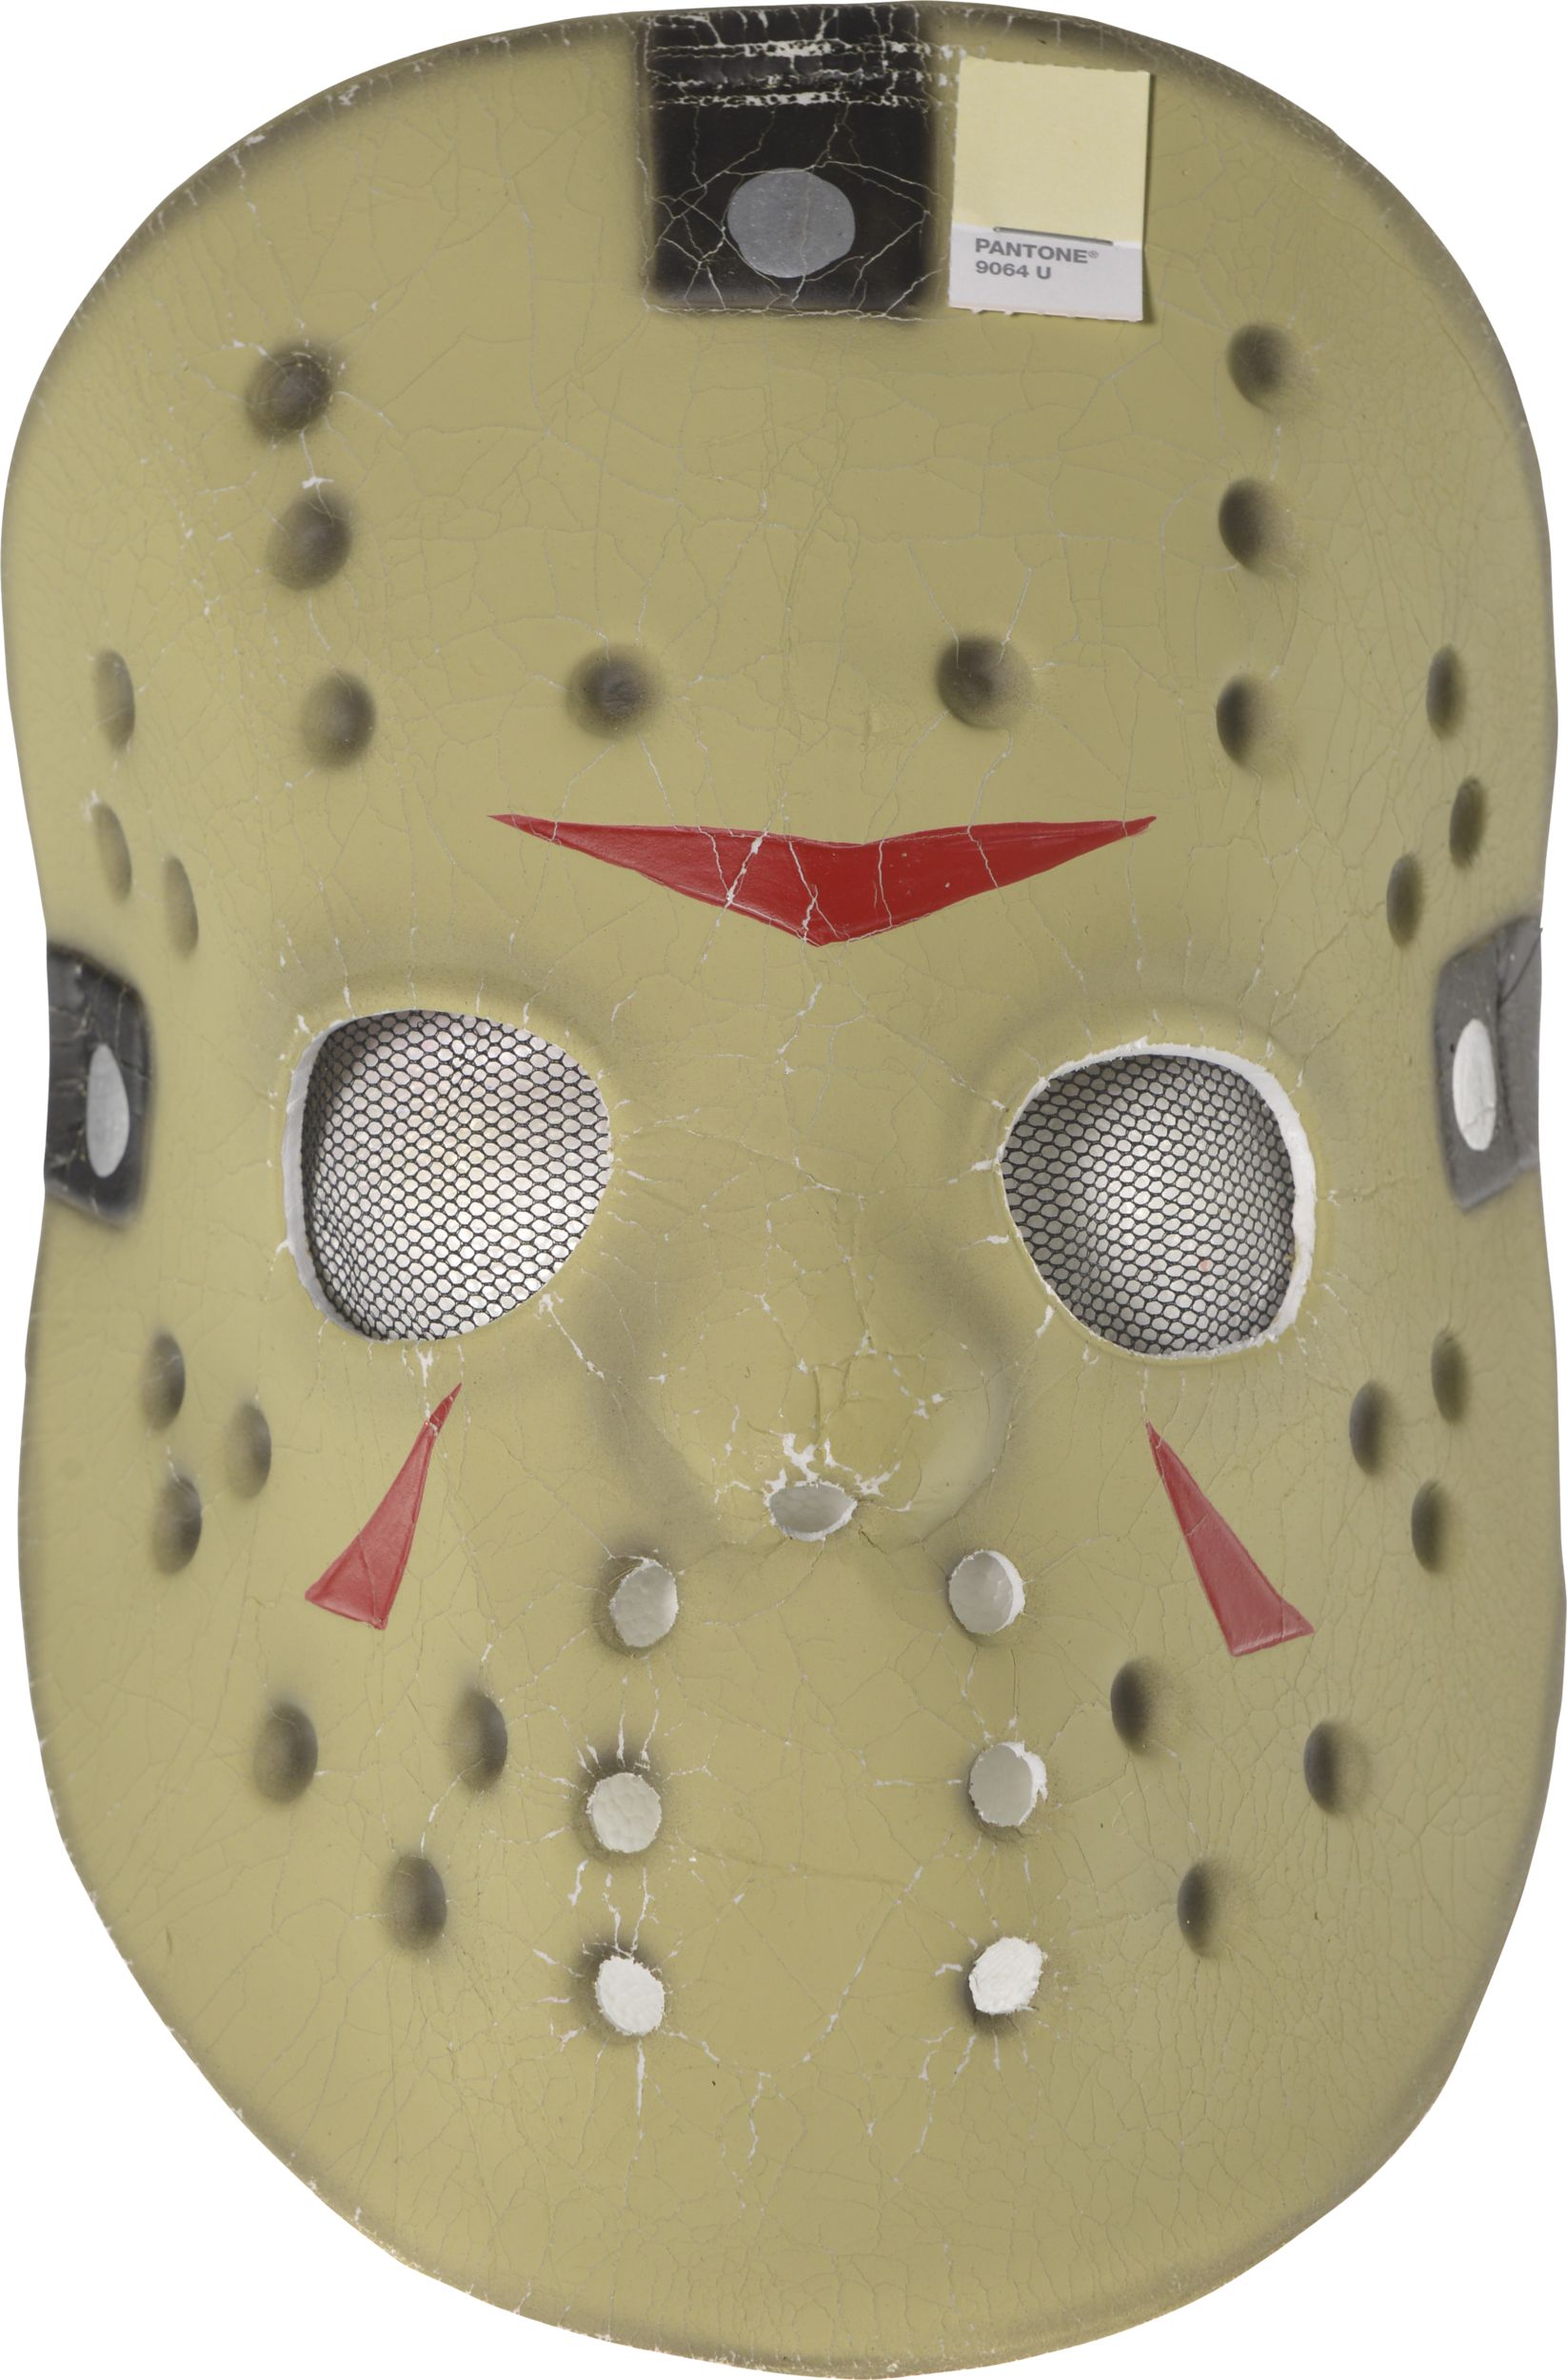 Friday the 13th: How Jason Got His Hockey Mask (In Both Versions)